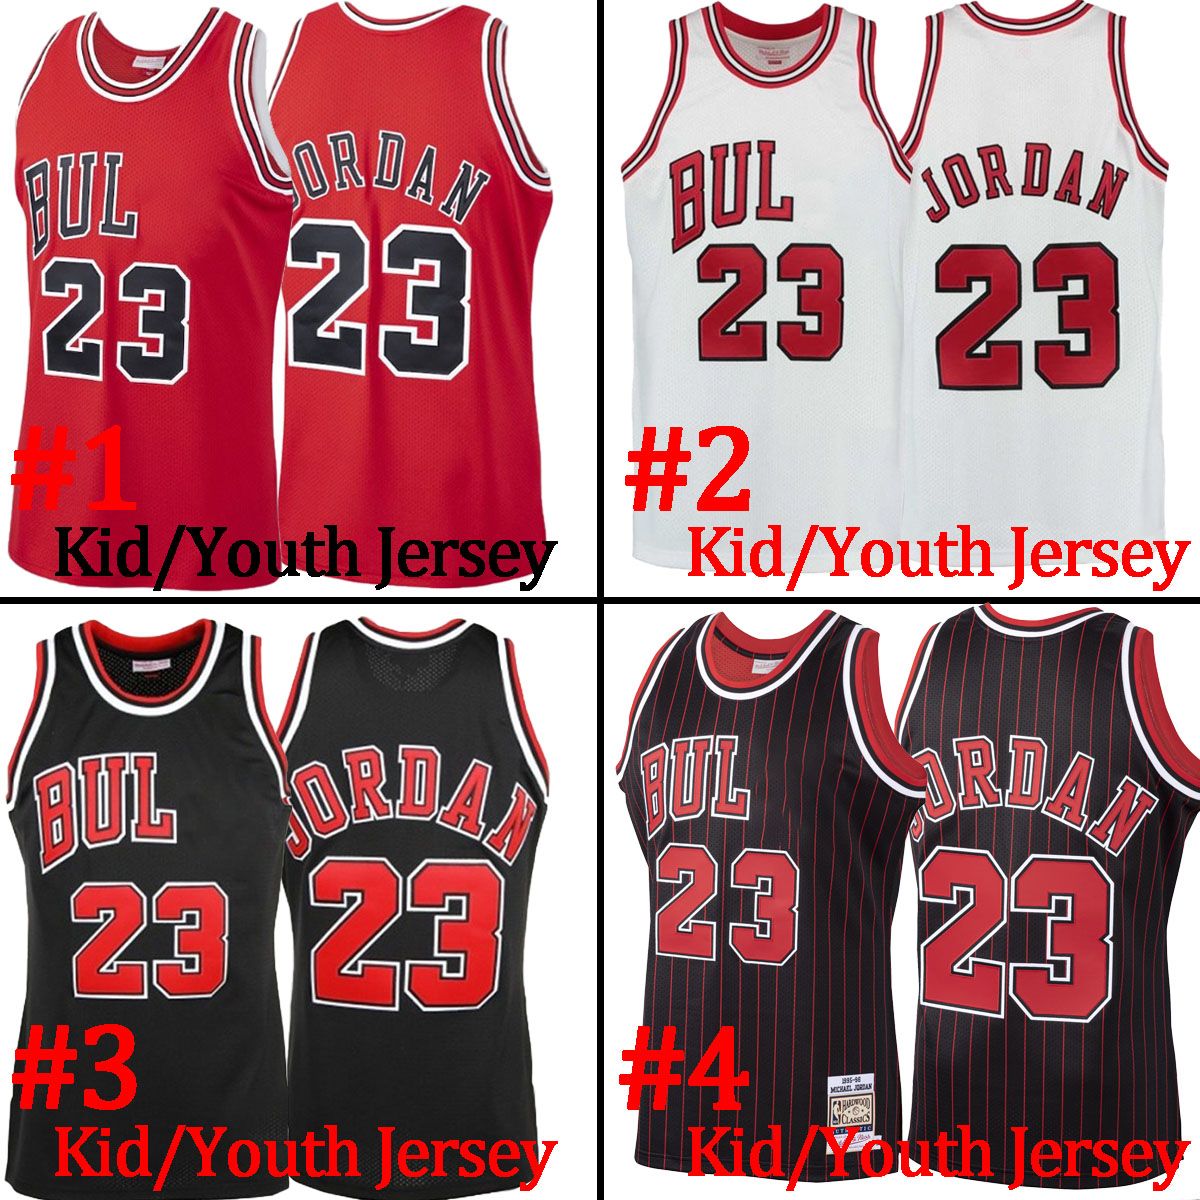 Youth/Kid Jersey-1